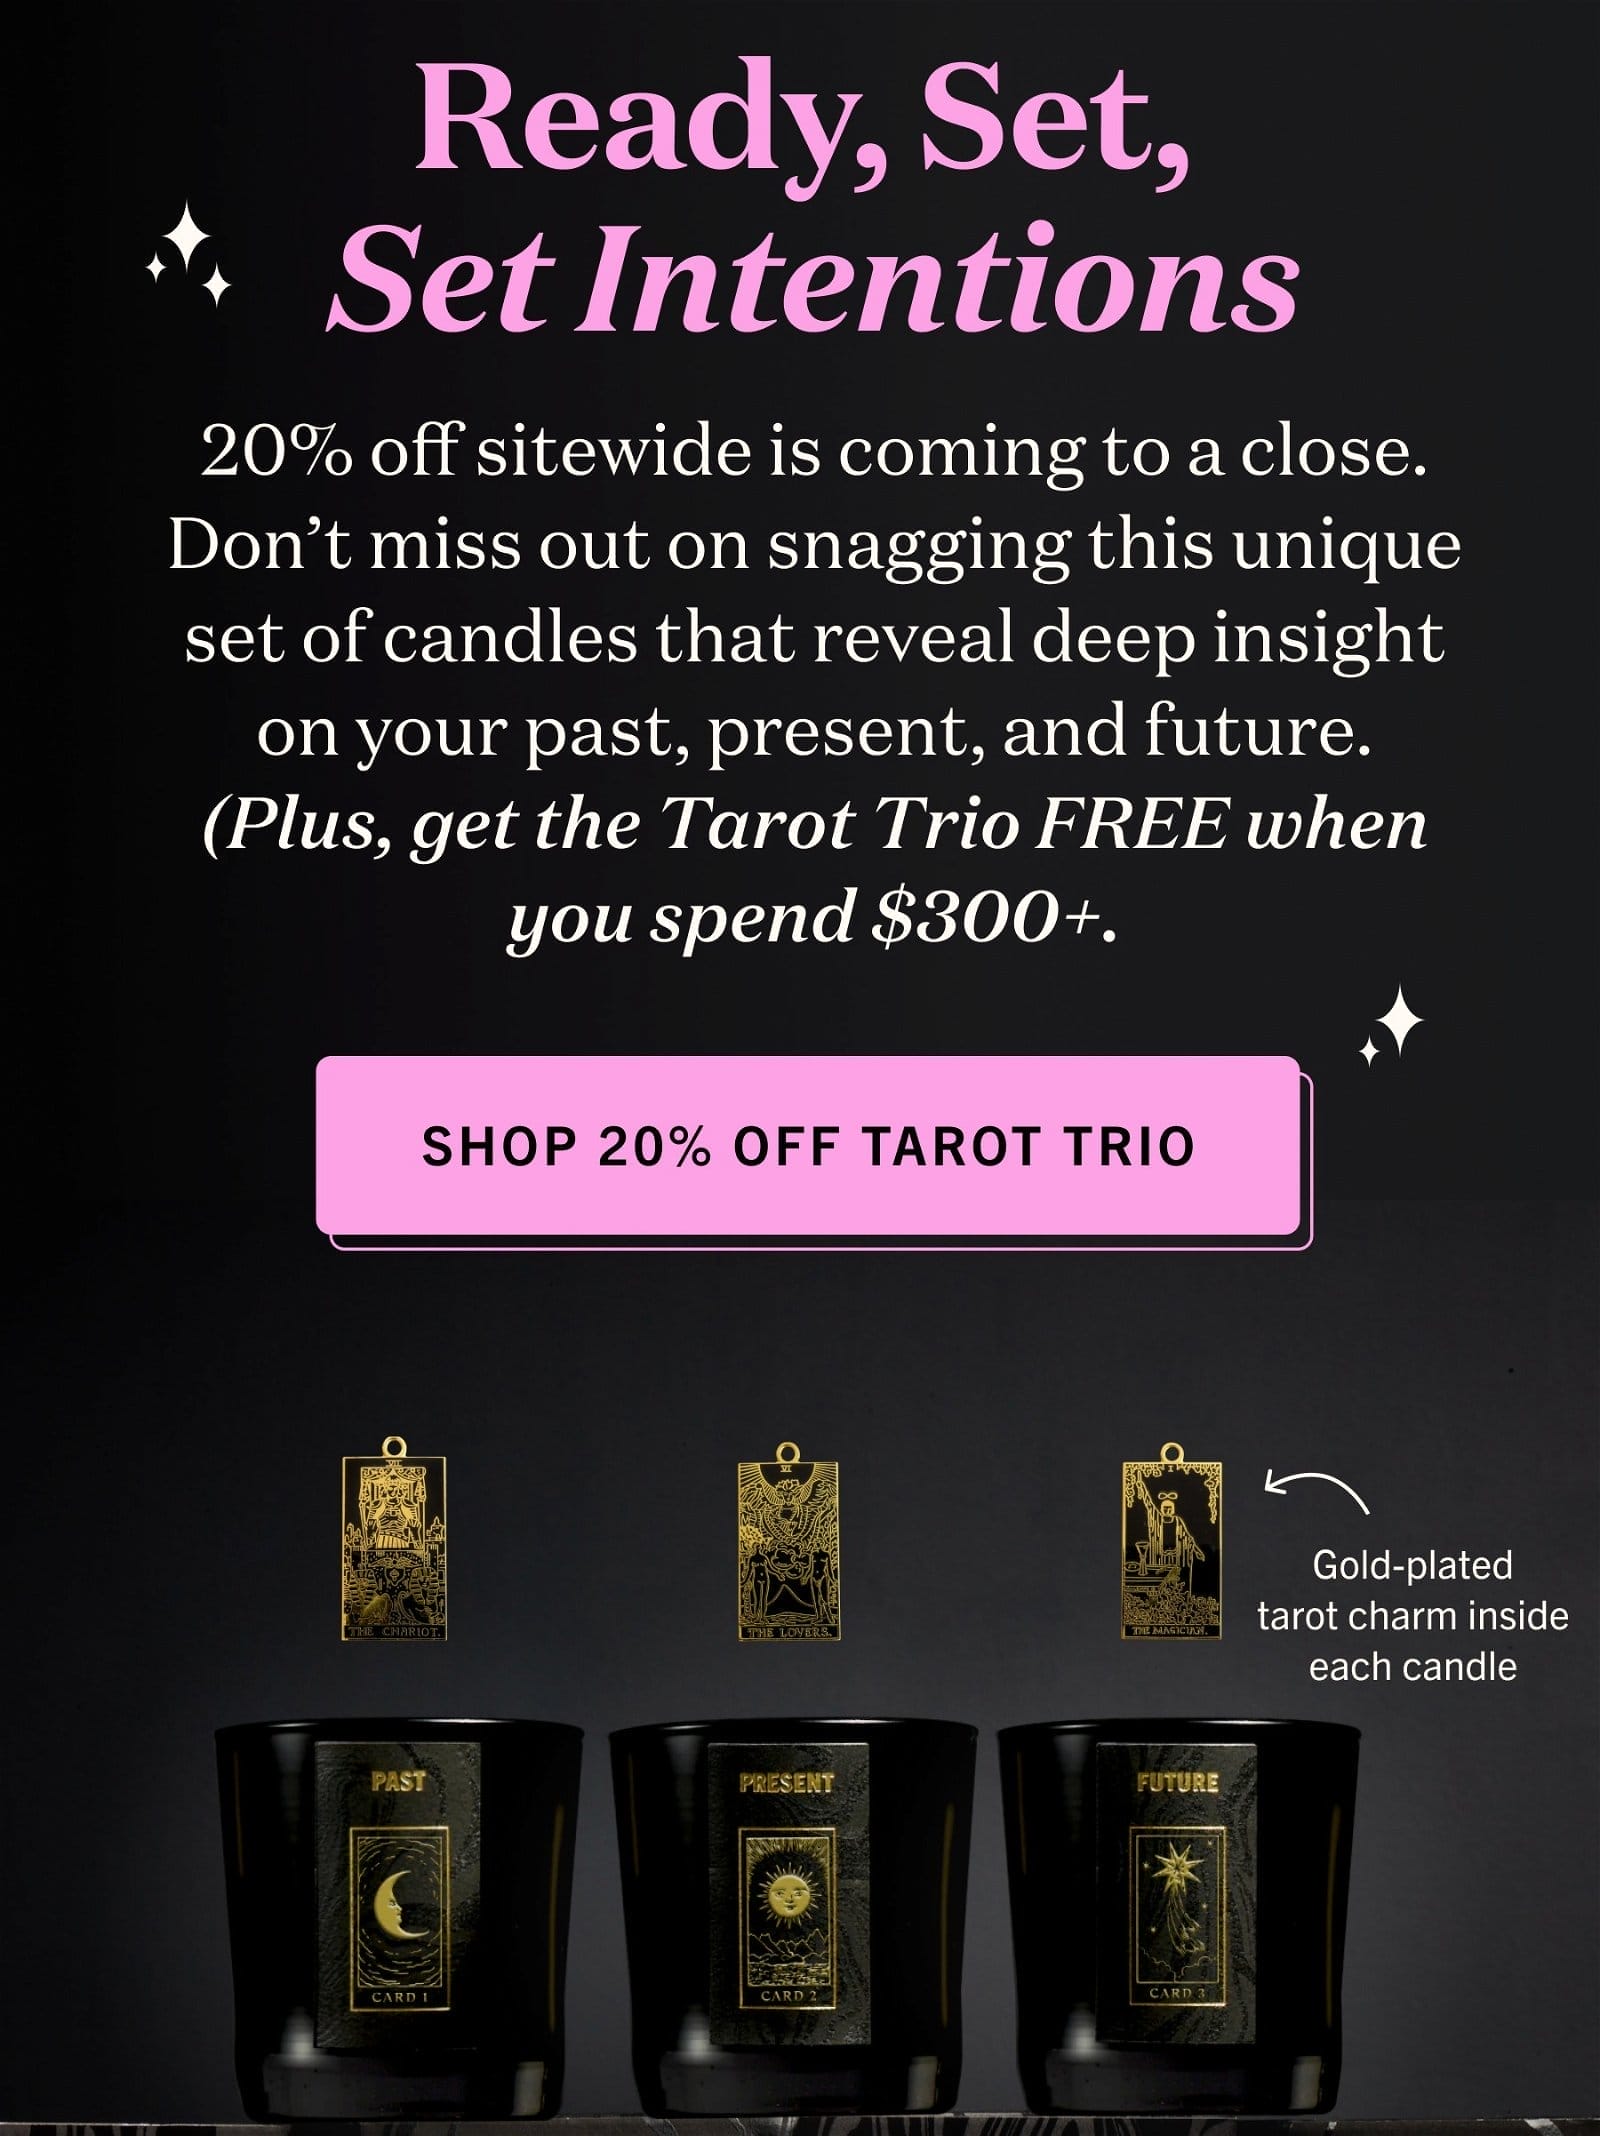 Ready, Set, Set Intentions 20% off sitewide is coming to a close. Don’t miss out on snagging this unique set of candles that reveal deep insight on your past, present, and future. (Plus, get the Tarot Trio FREE when you spend \\$300+. SHOP 20% OFF TAROT TRIO